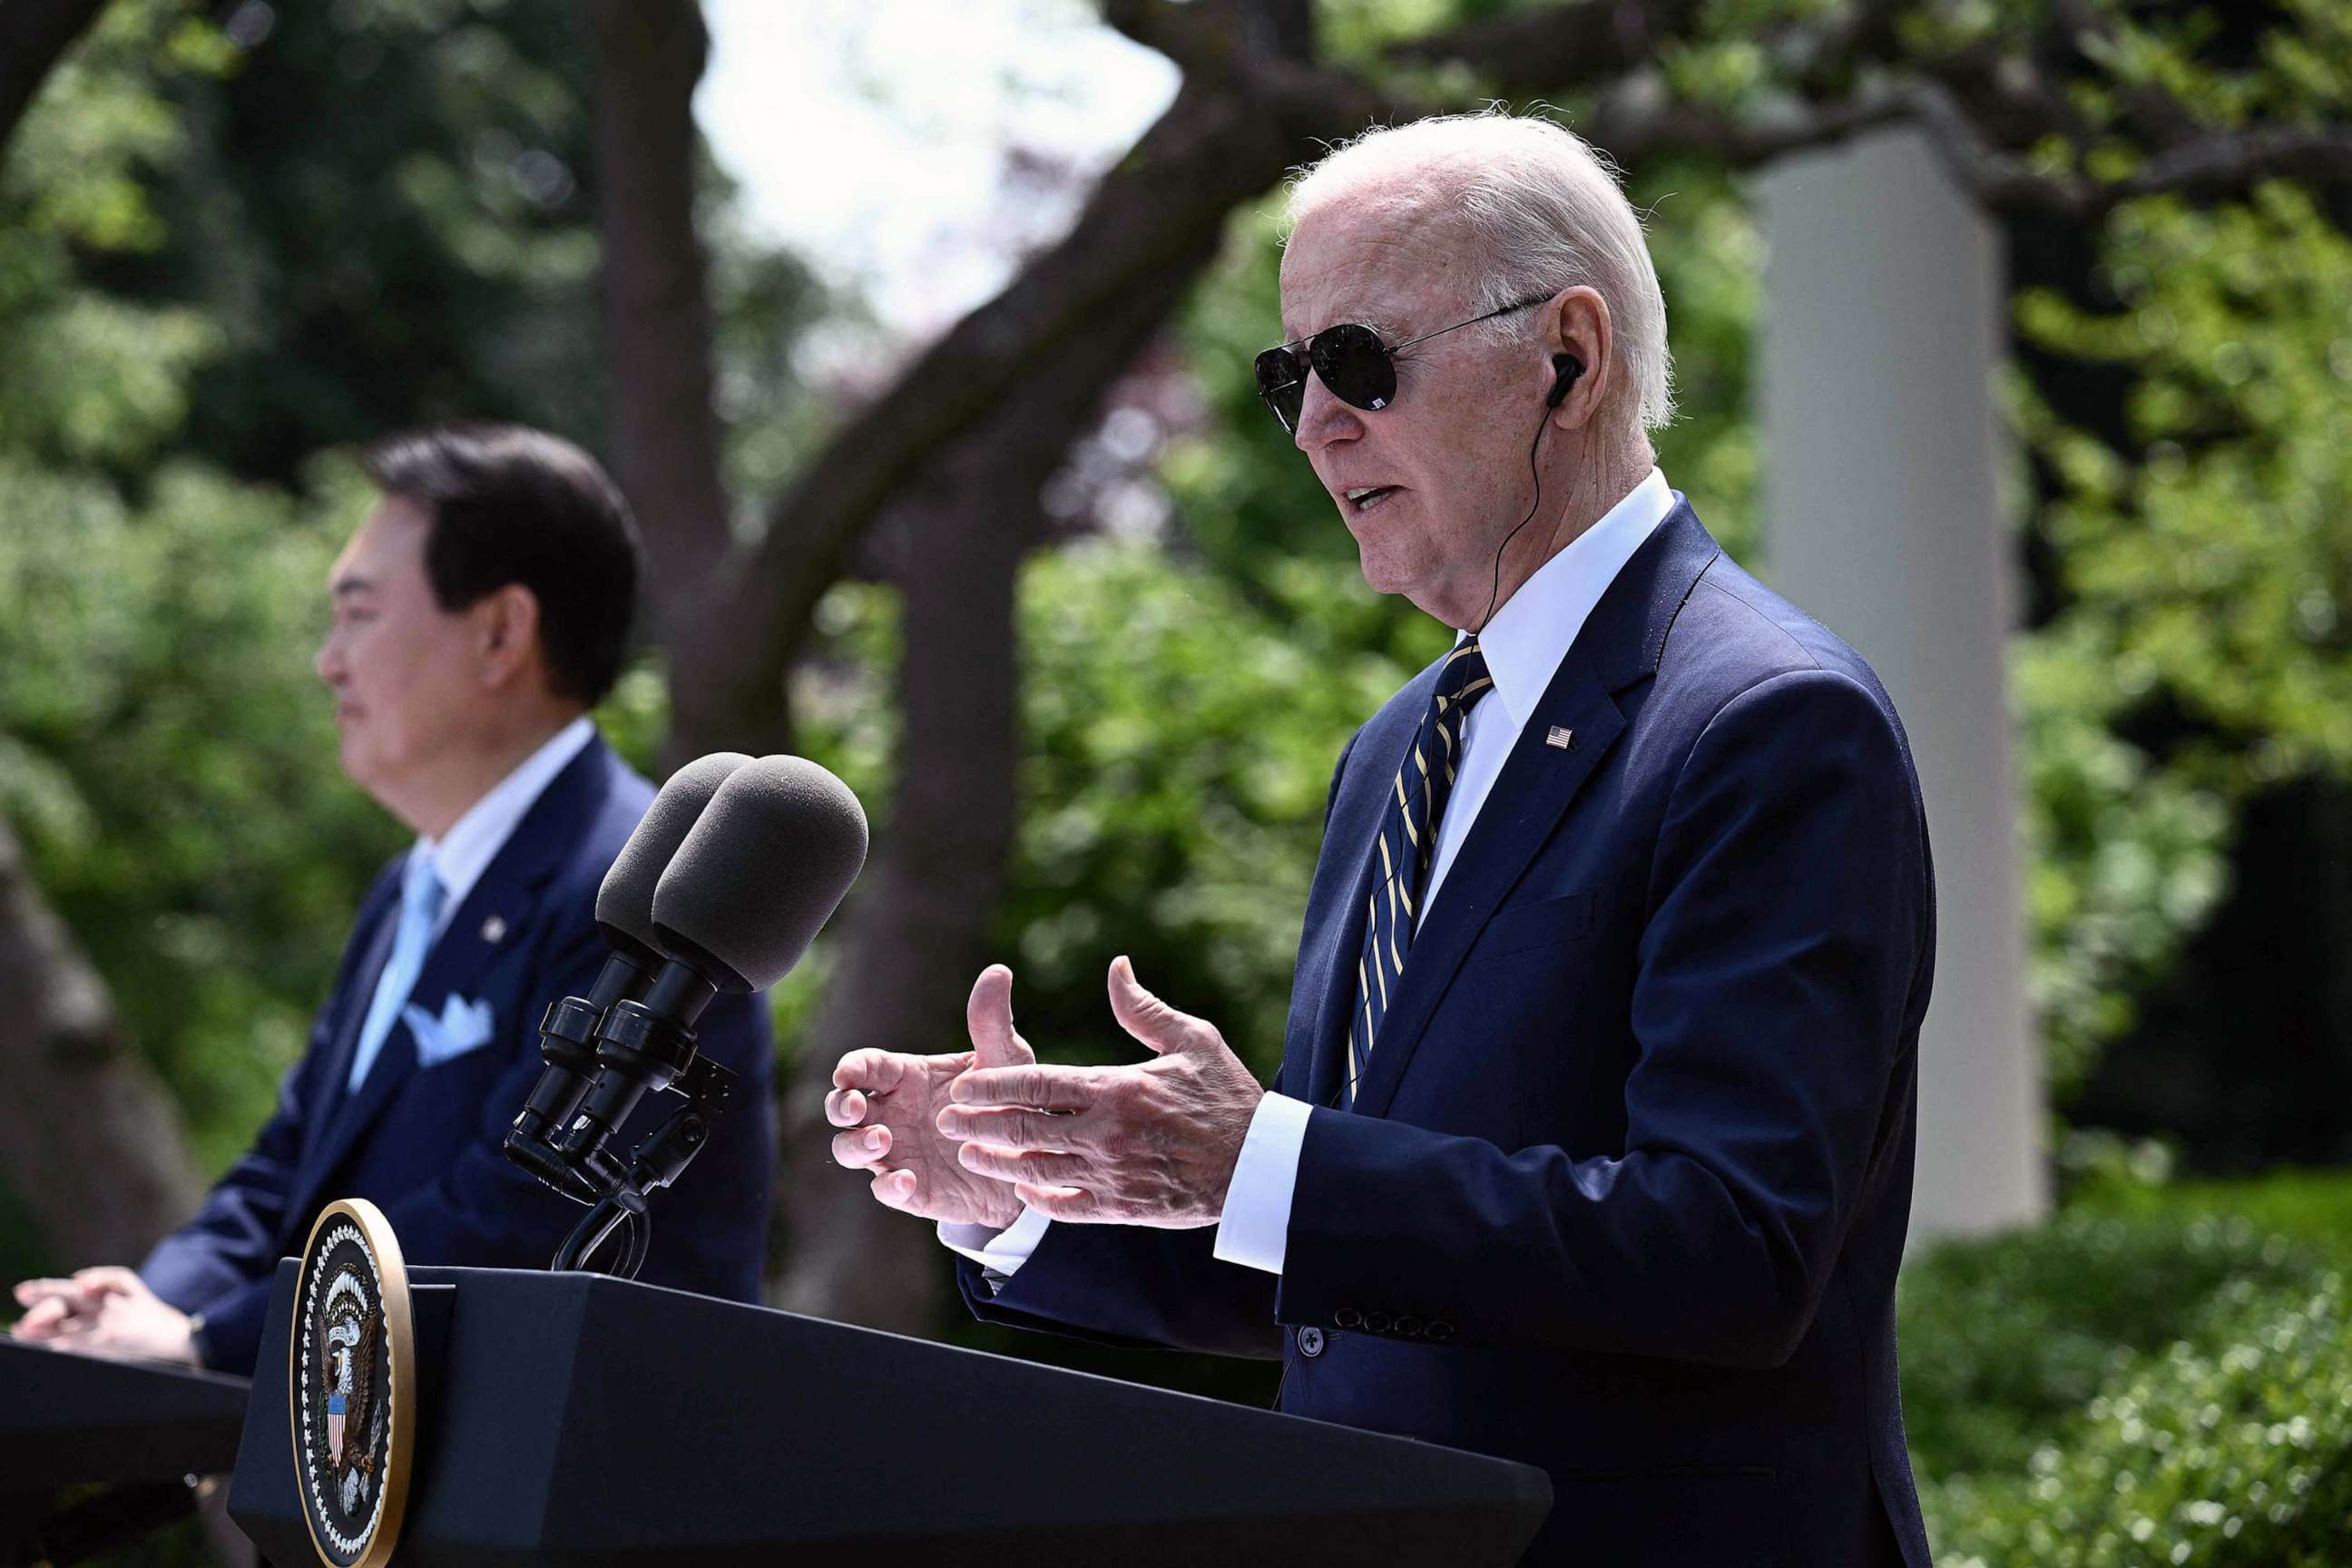 PHOTO: US President Joe Biden and South Korean President Yoon Suk Yeol participate in a news conference in the Rose Garden of the White House in Washington, DC, April 26, 2023.